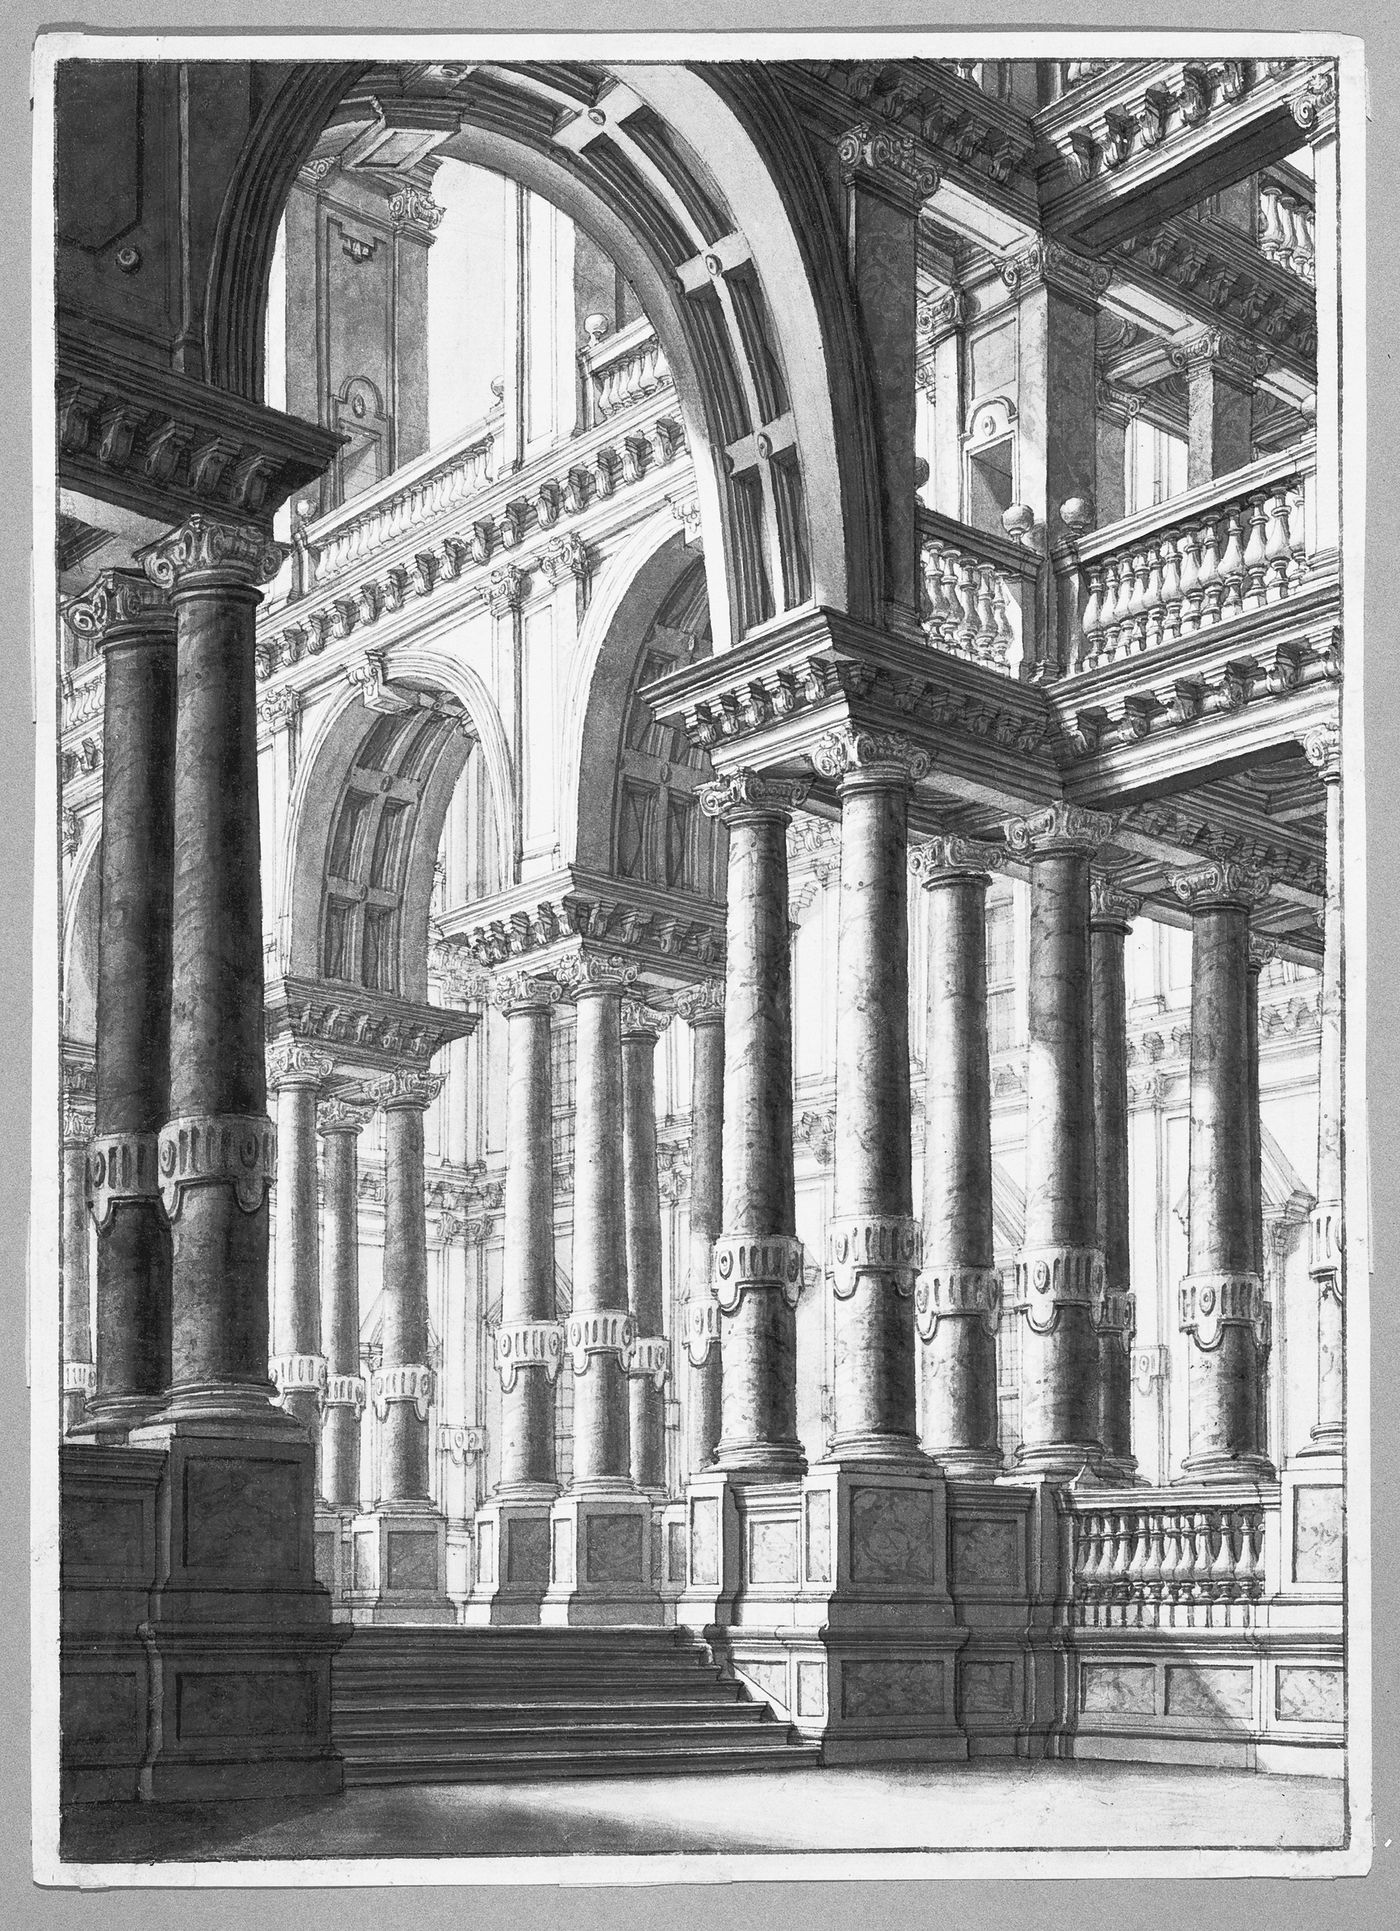 Stage design: interior of a monumental, columned hall in a palace